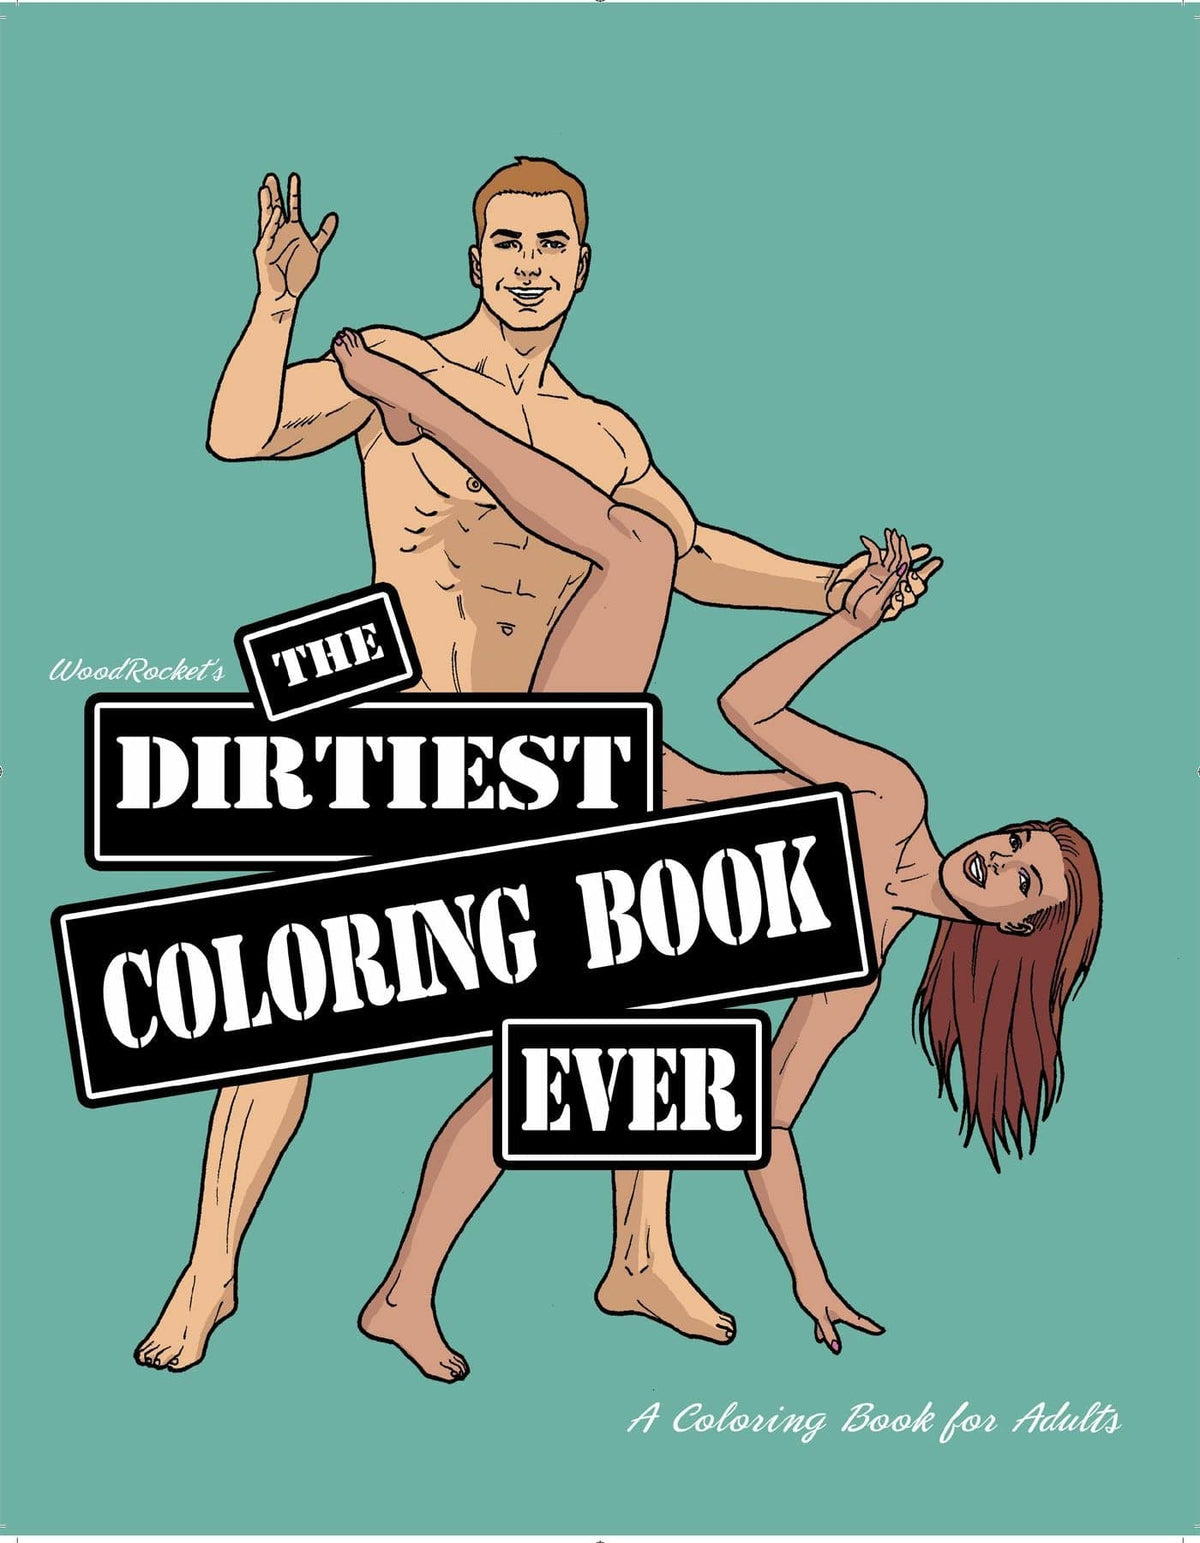 THE DIRTIEST COLORING BOOK EVER